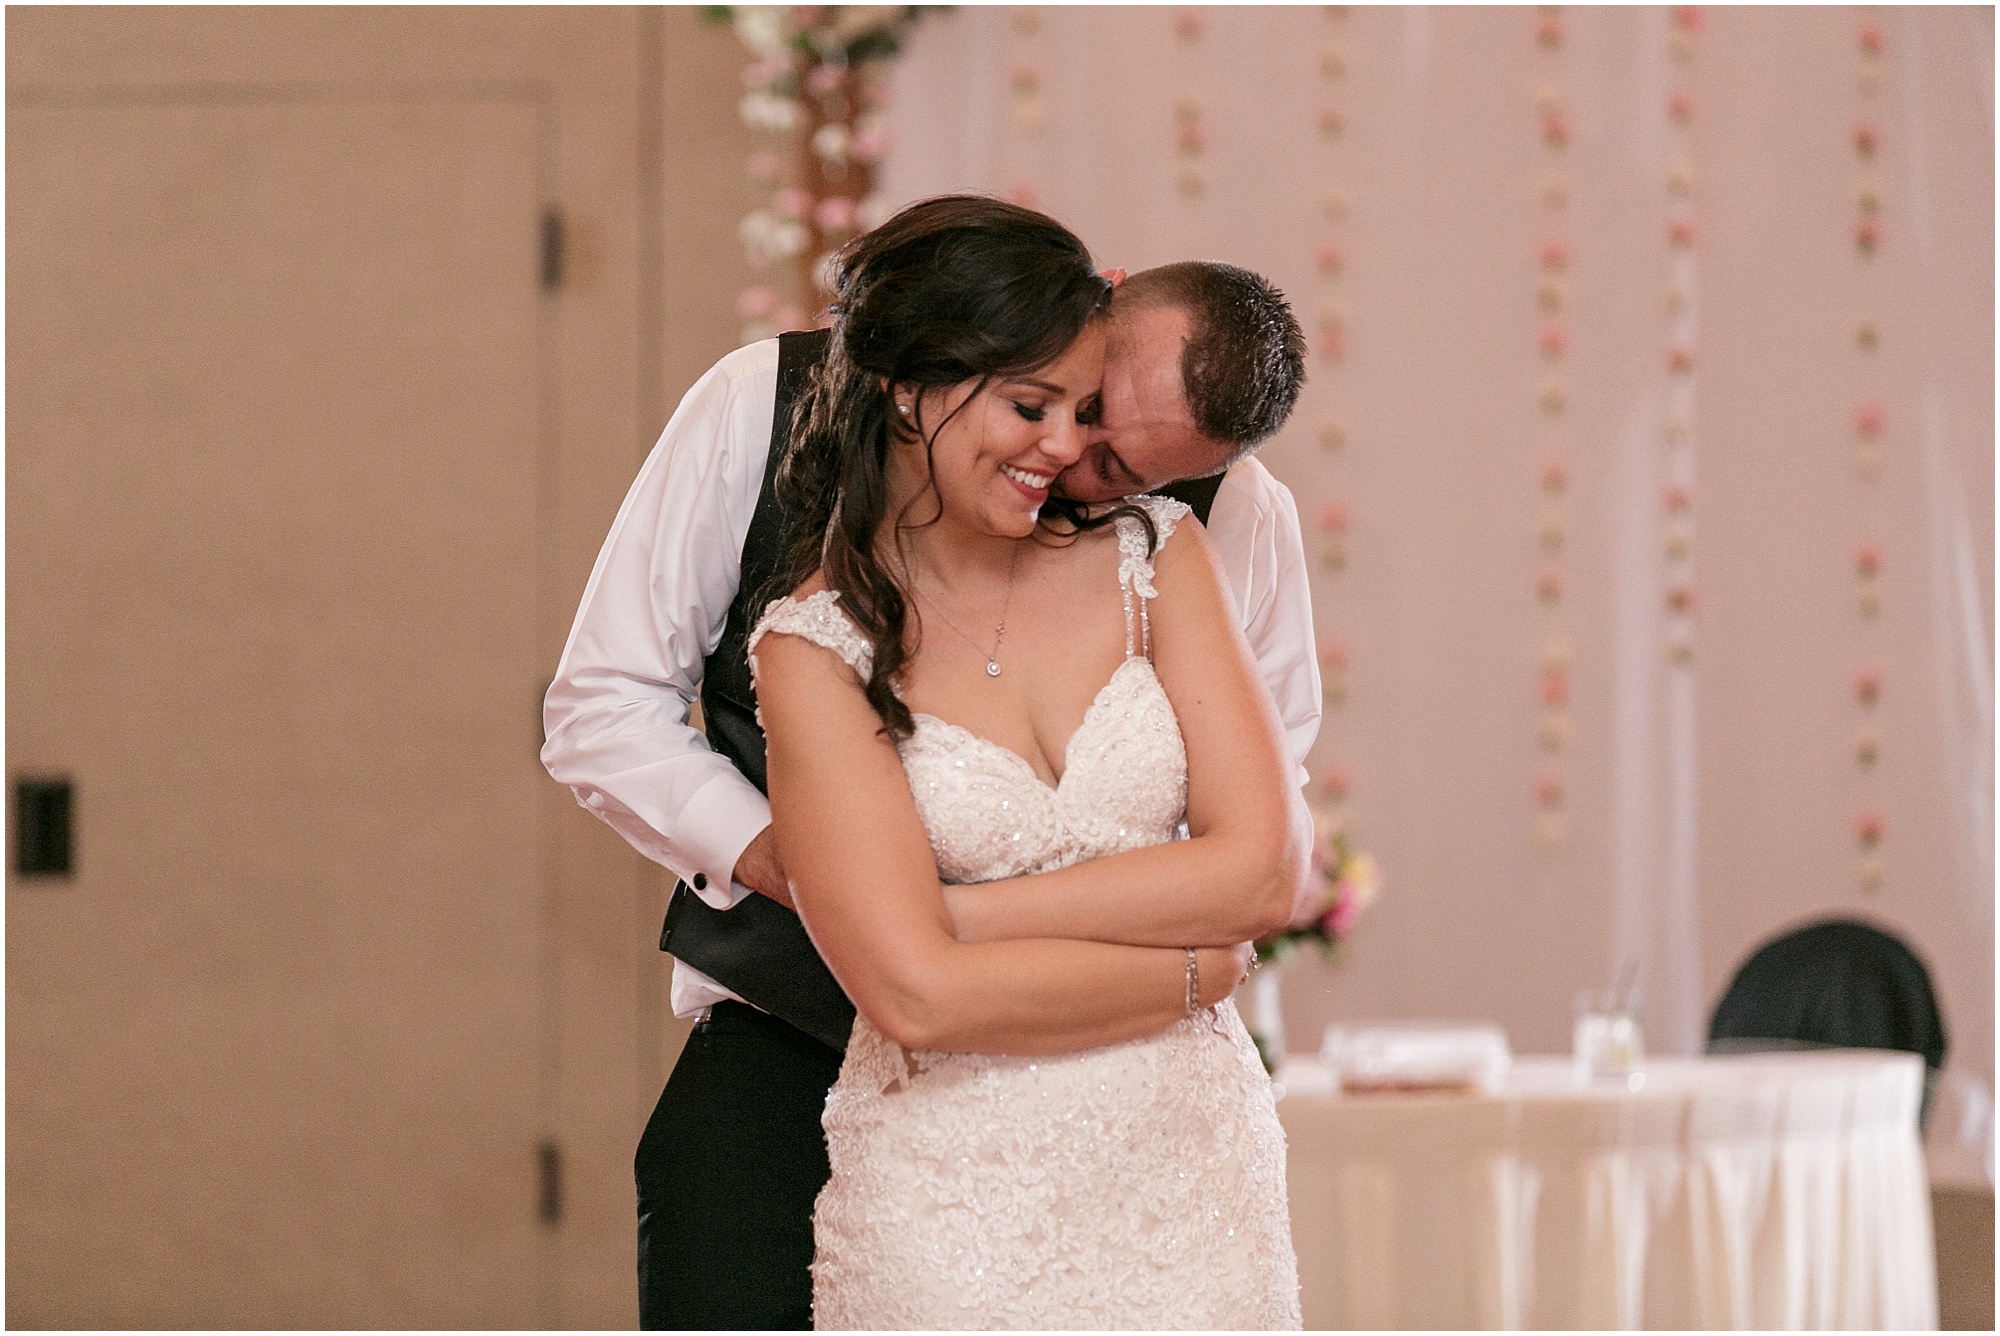 Bride and groom sharing their last dance at their classic pink and blush wedding reception. 